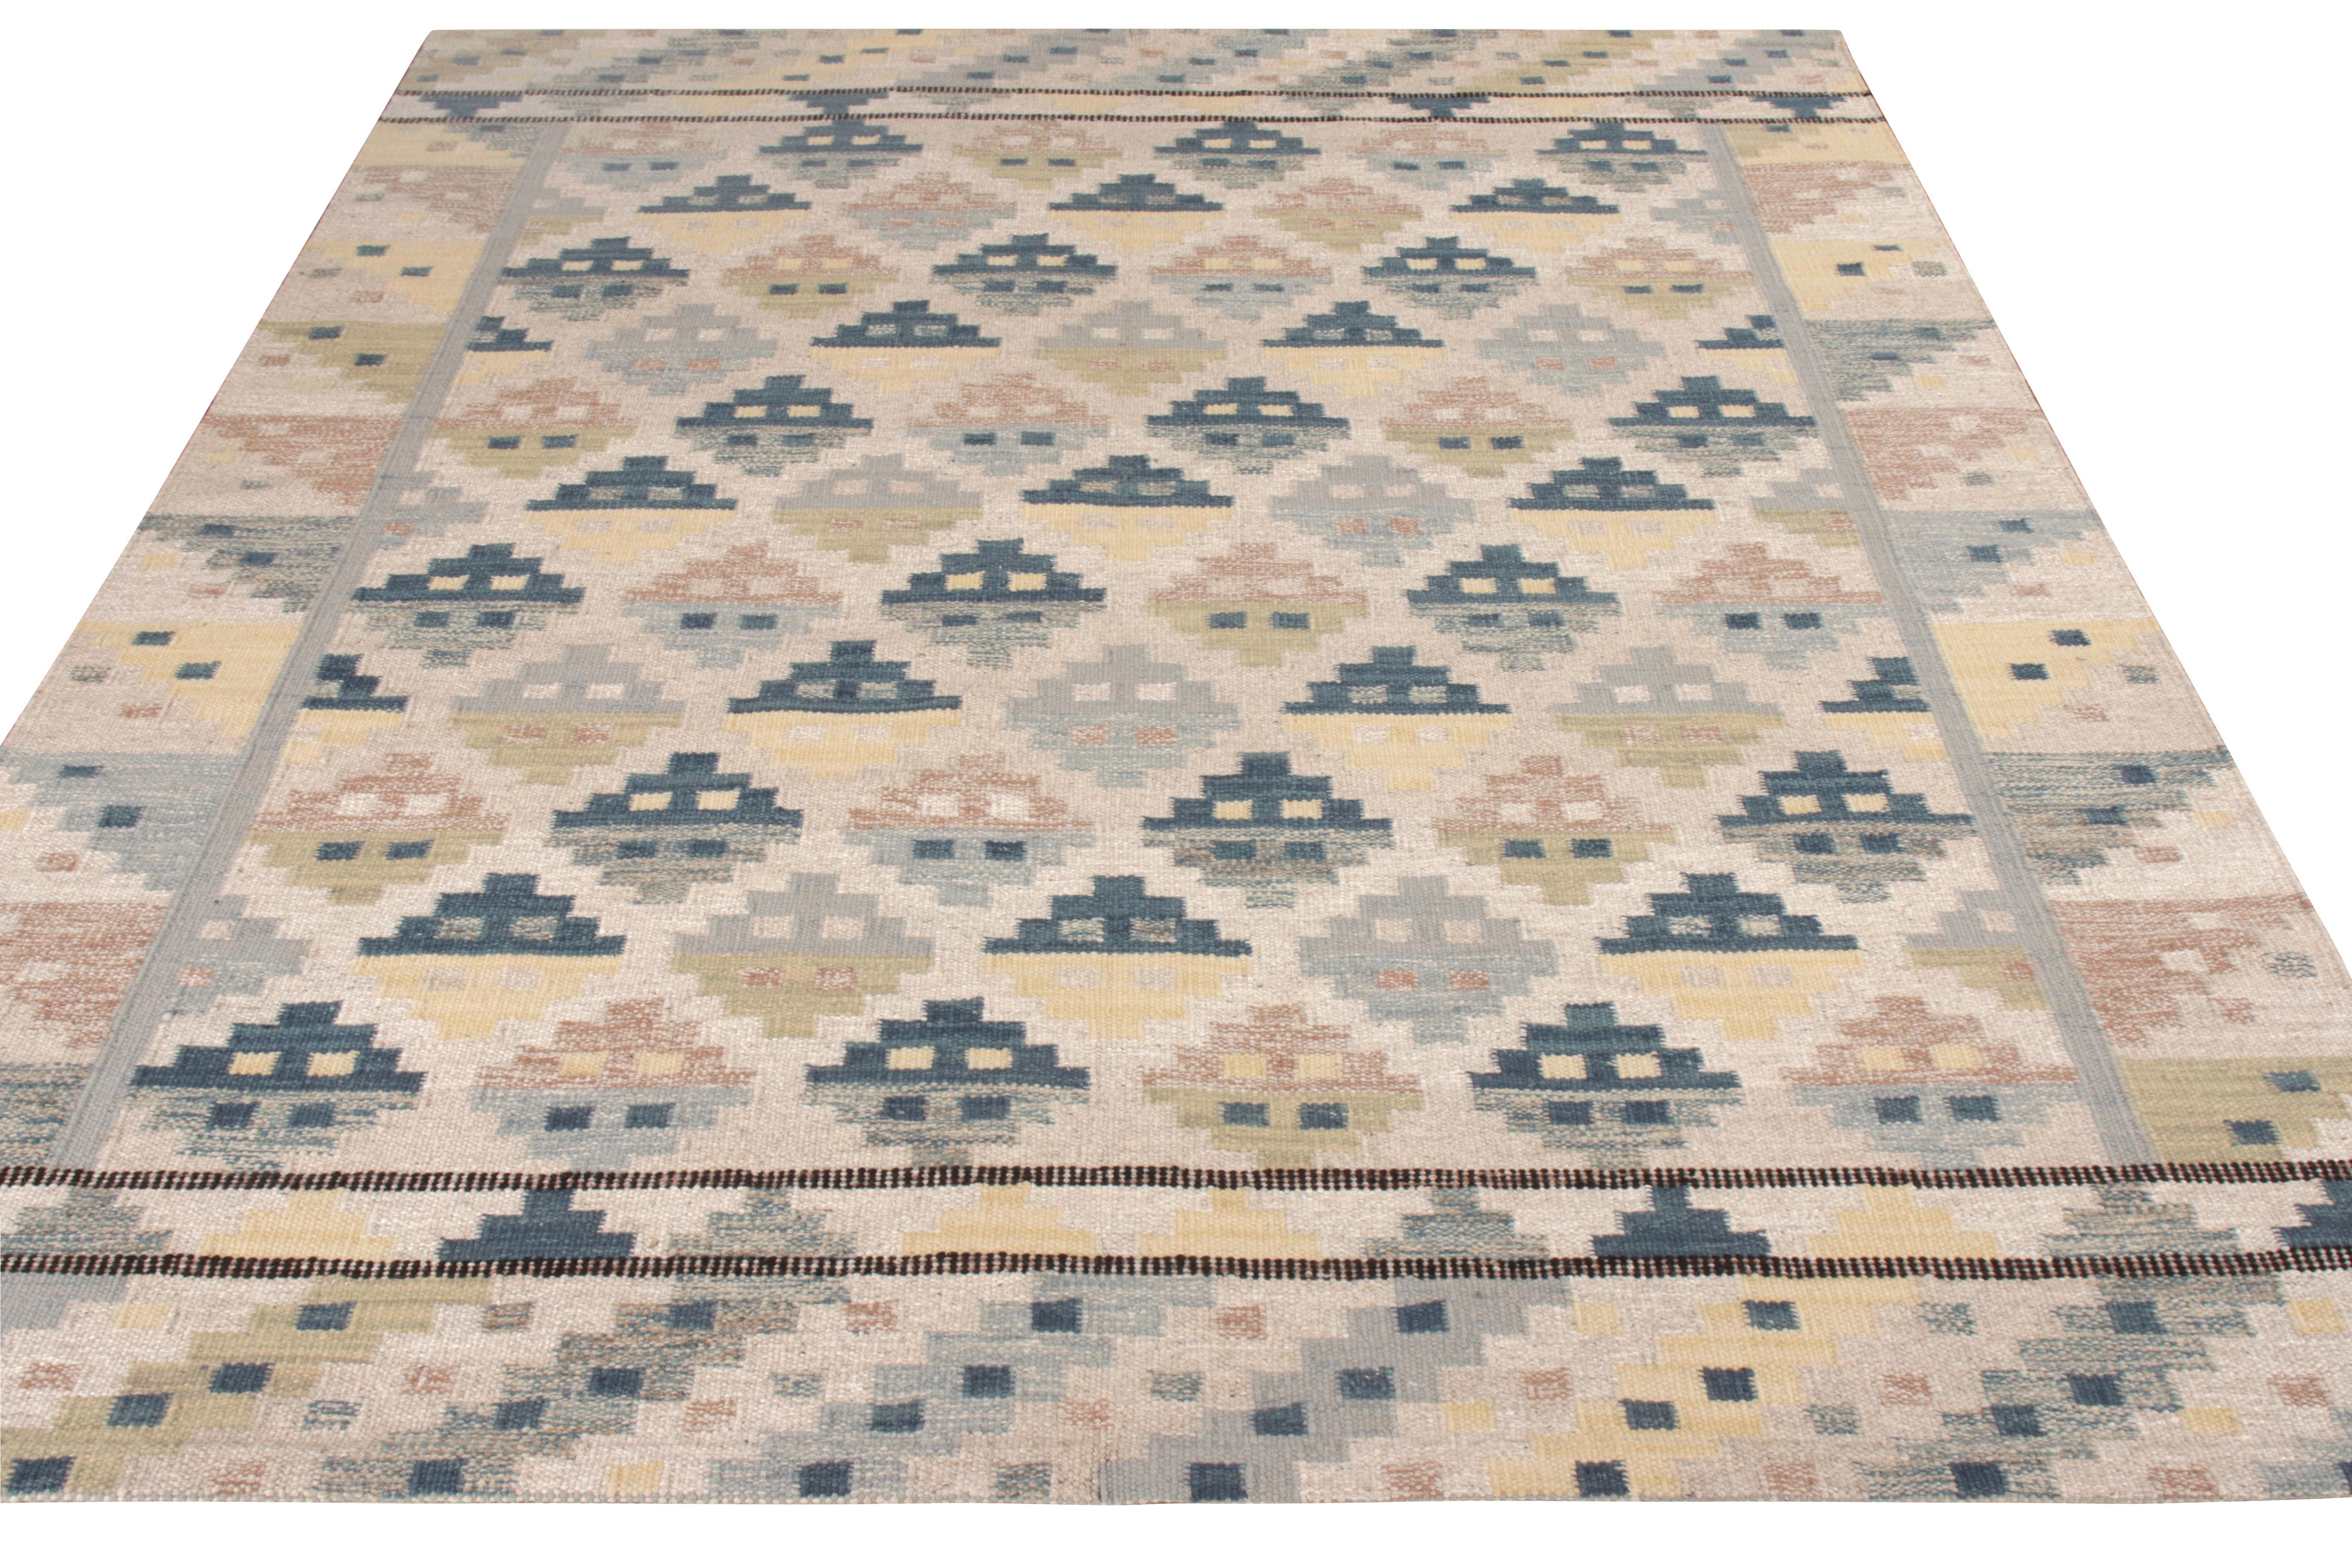 Handwoven in wool and undyed natural yarns, this 8x10 Kilim rug is an enthralling new addition to Rug & Kilim’s celebrated Scandinavian Kilim Collection. The beauty of the rug lies in its elaborate geometric pattern enclosed in a mature blue and